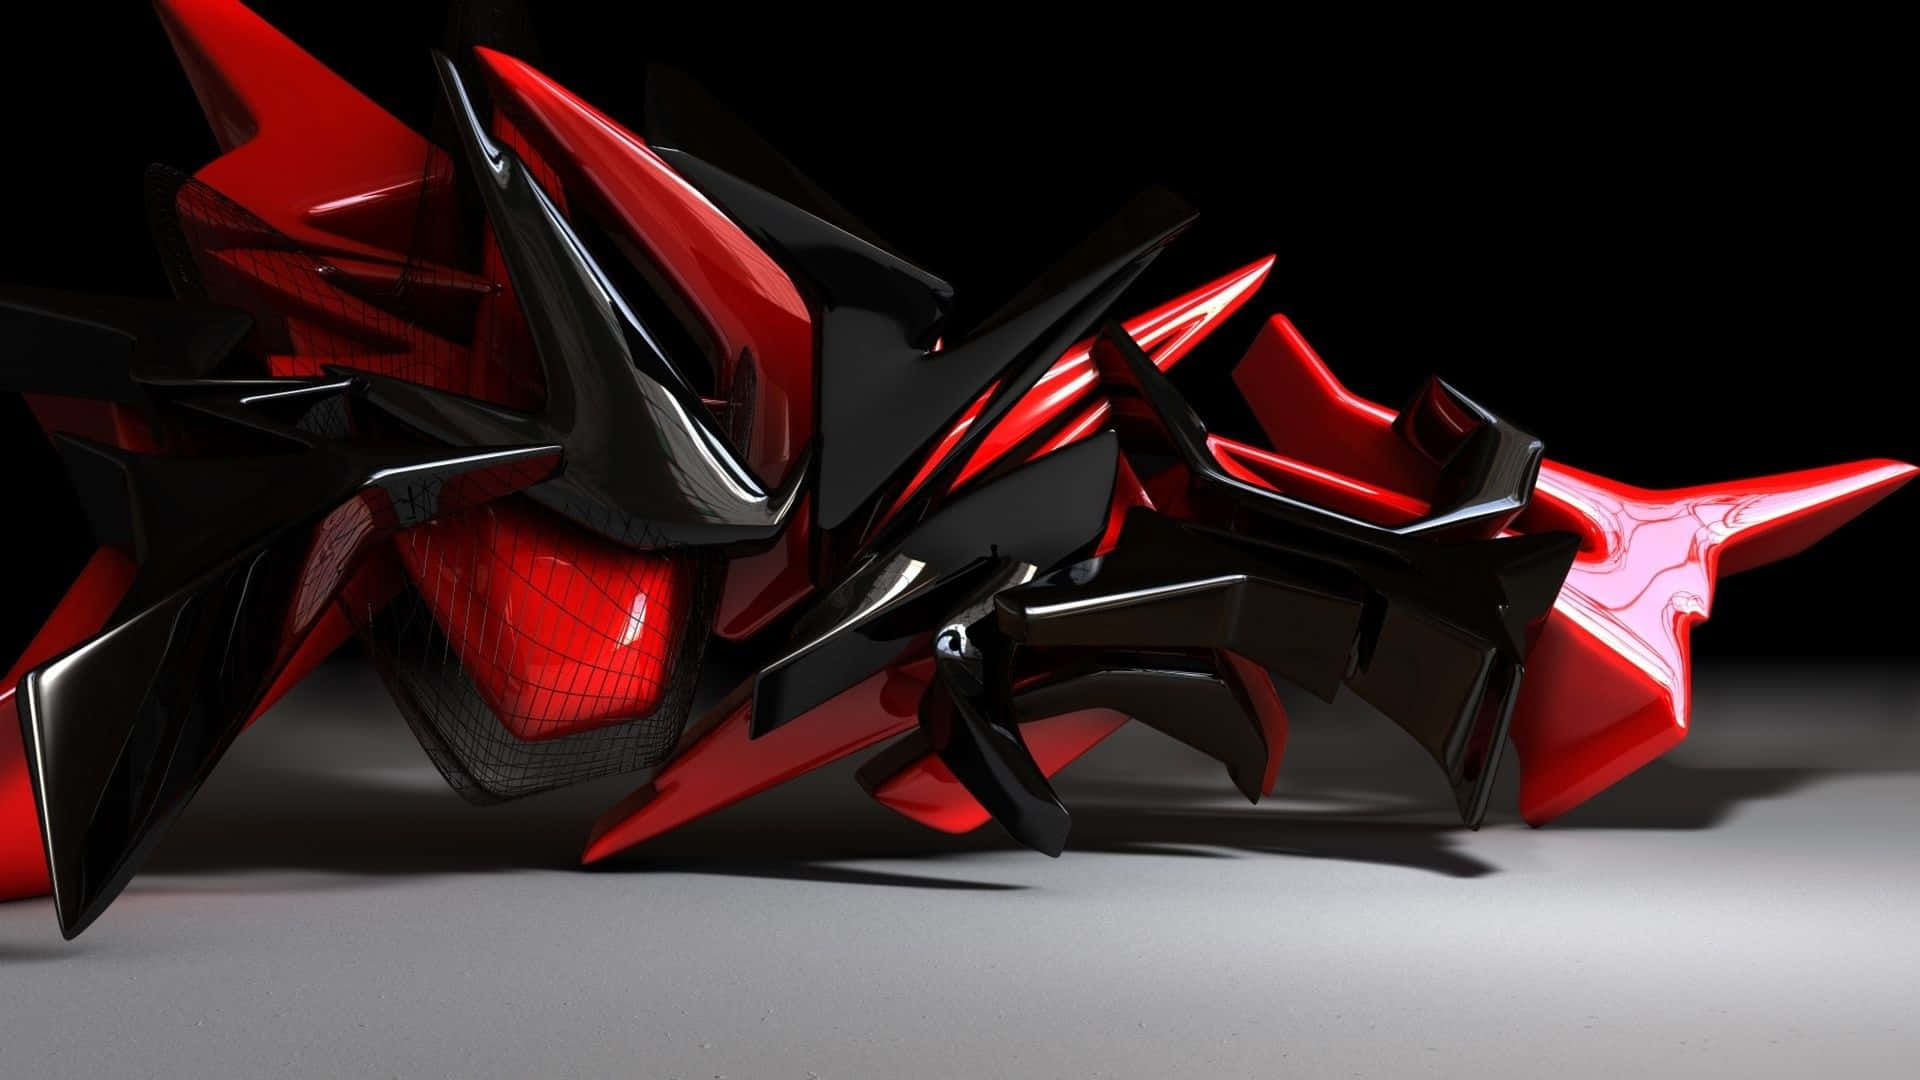 A Red And Black Abstract Sculpture Wallpaper